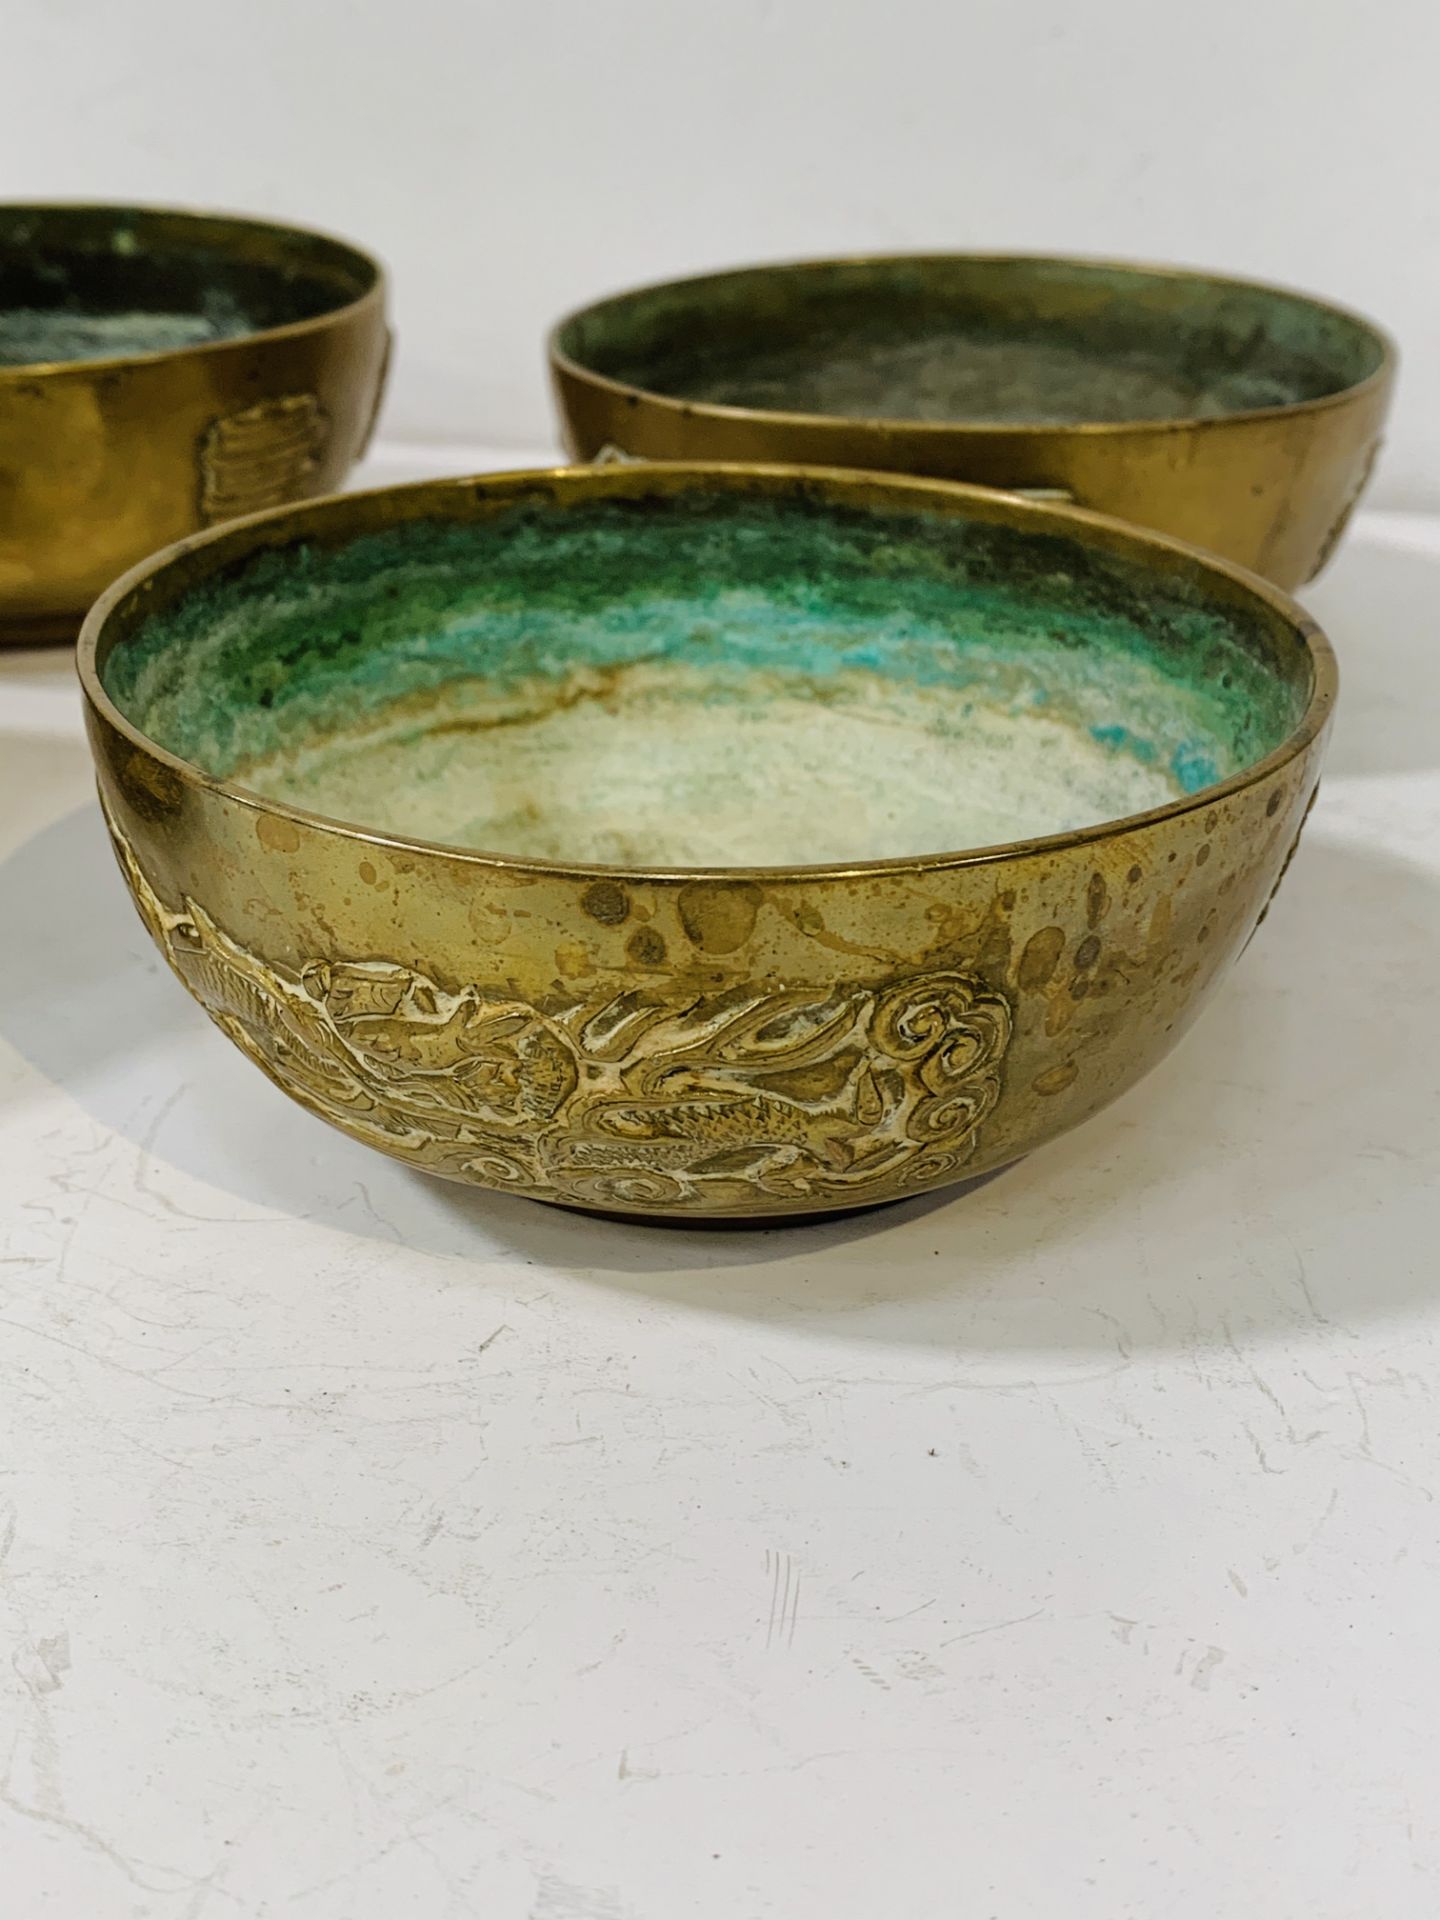 Set of 4 Chinese bronze 11.5cms bowls with Dragon design and character marks. - Image 2 of 3